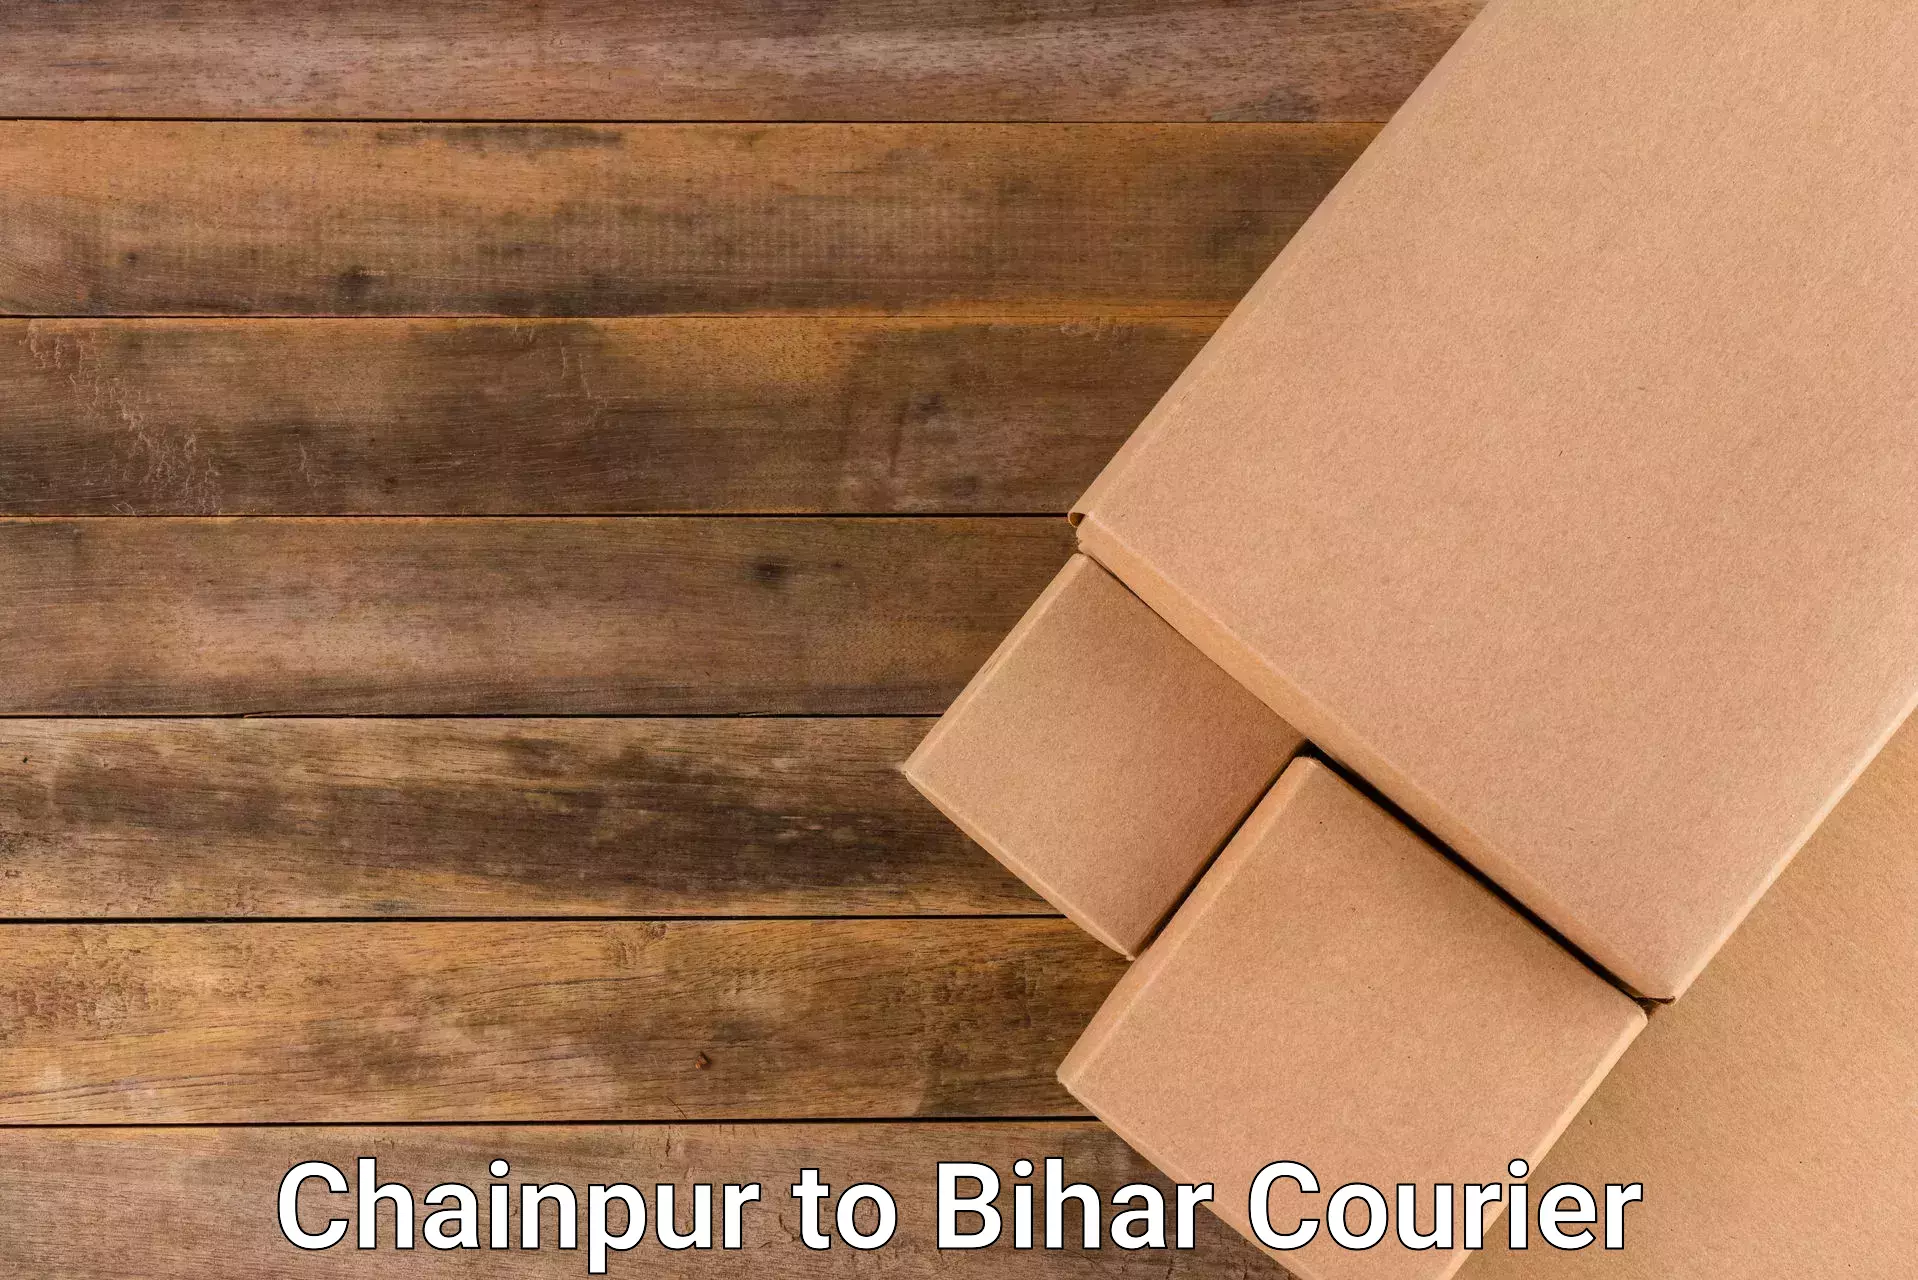 Nationwide courier service Chainpur to Bihar